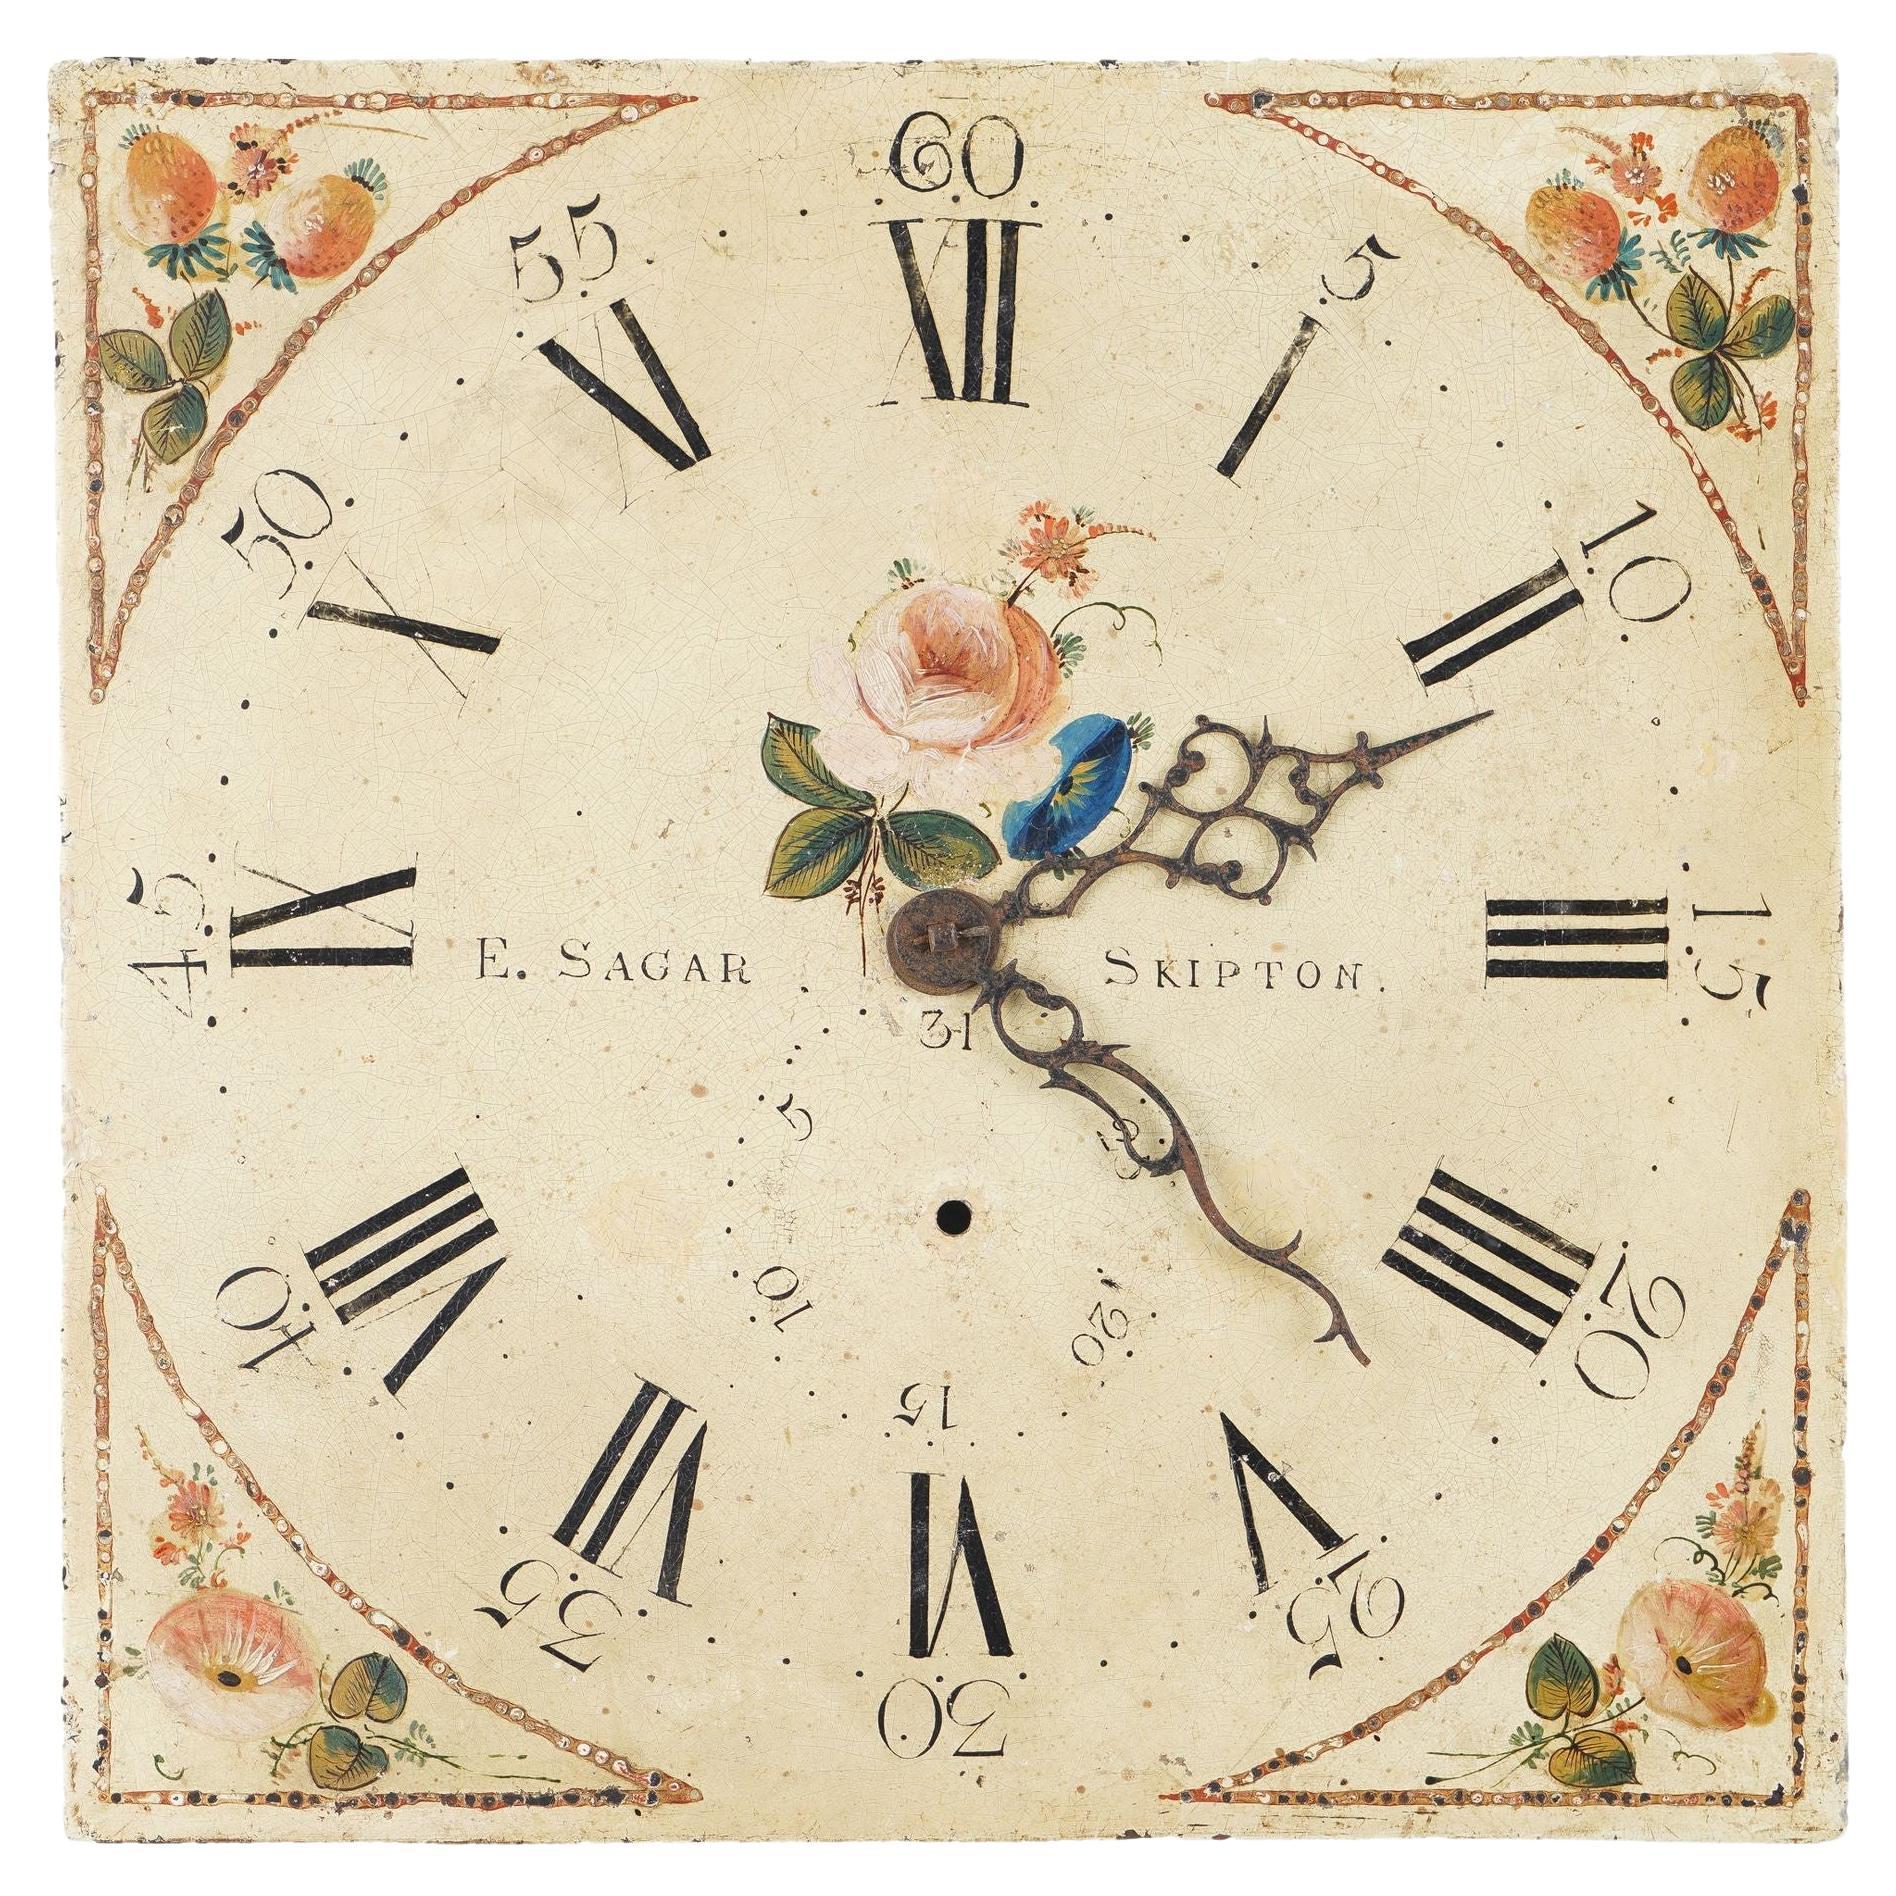 Japanned steel clock face with English roses by Edmund Sagar, 1793-1805 For Sale